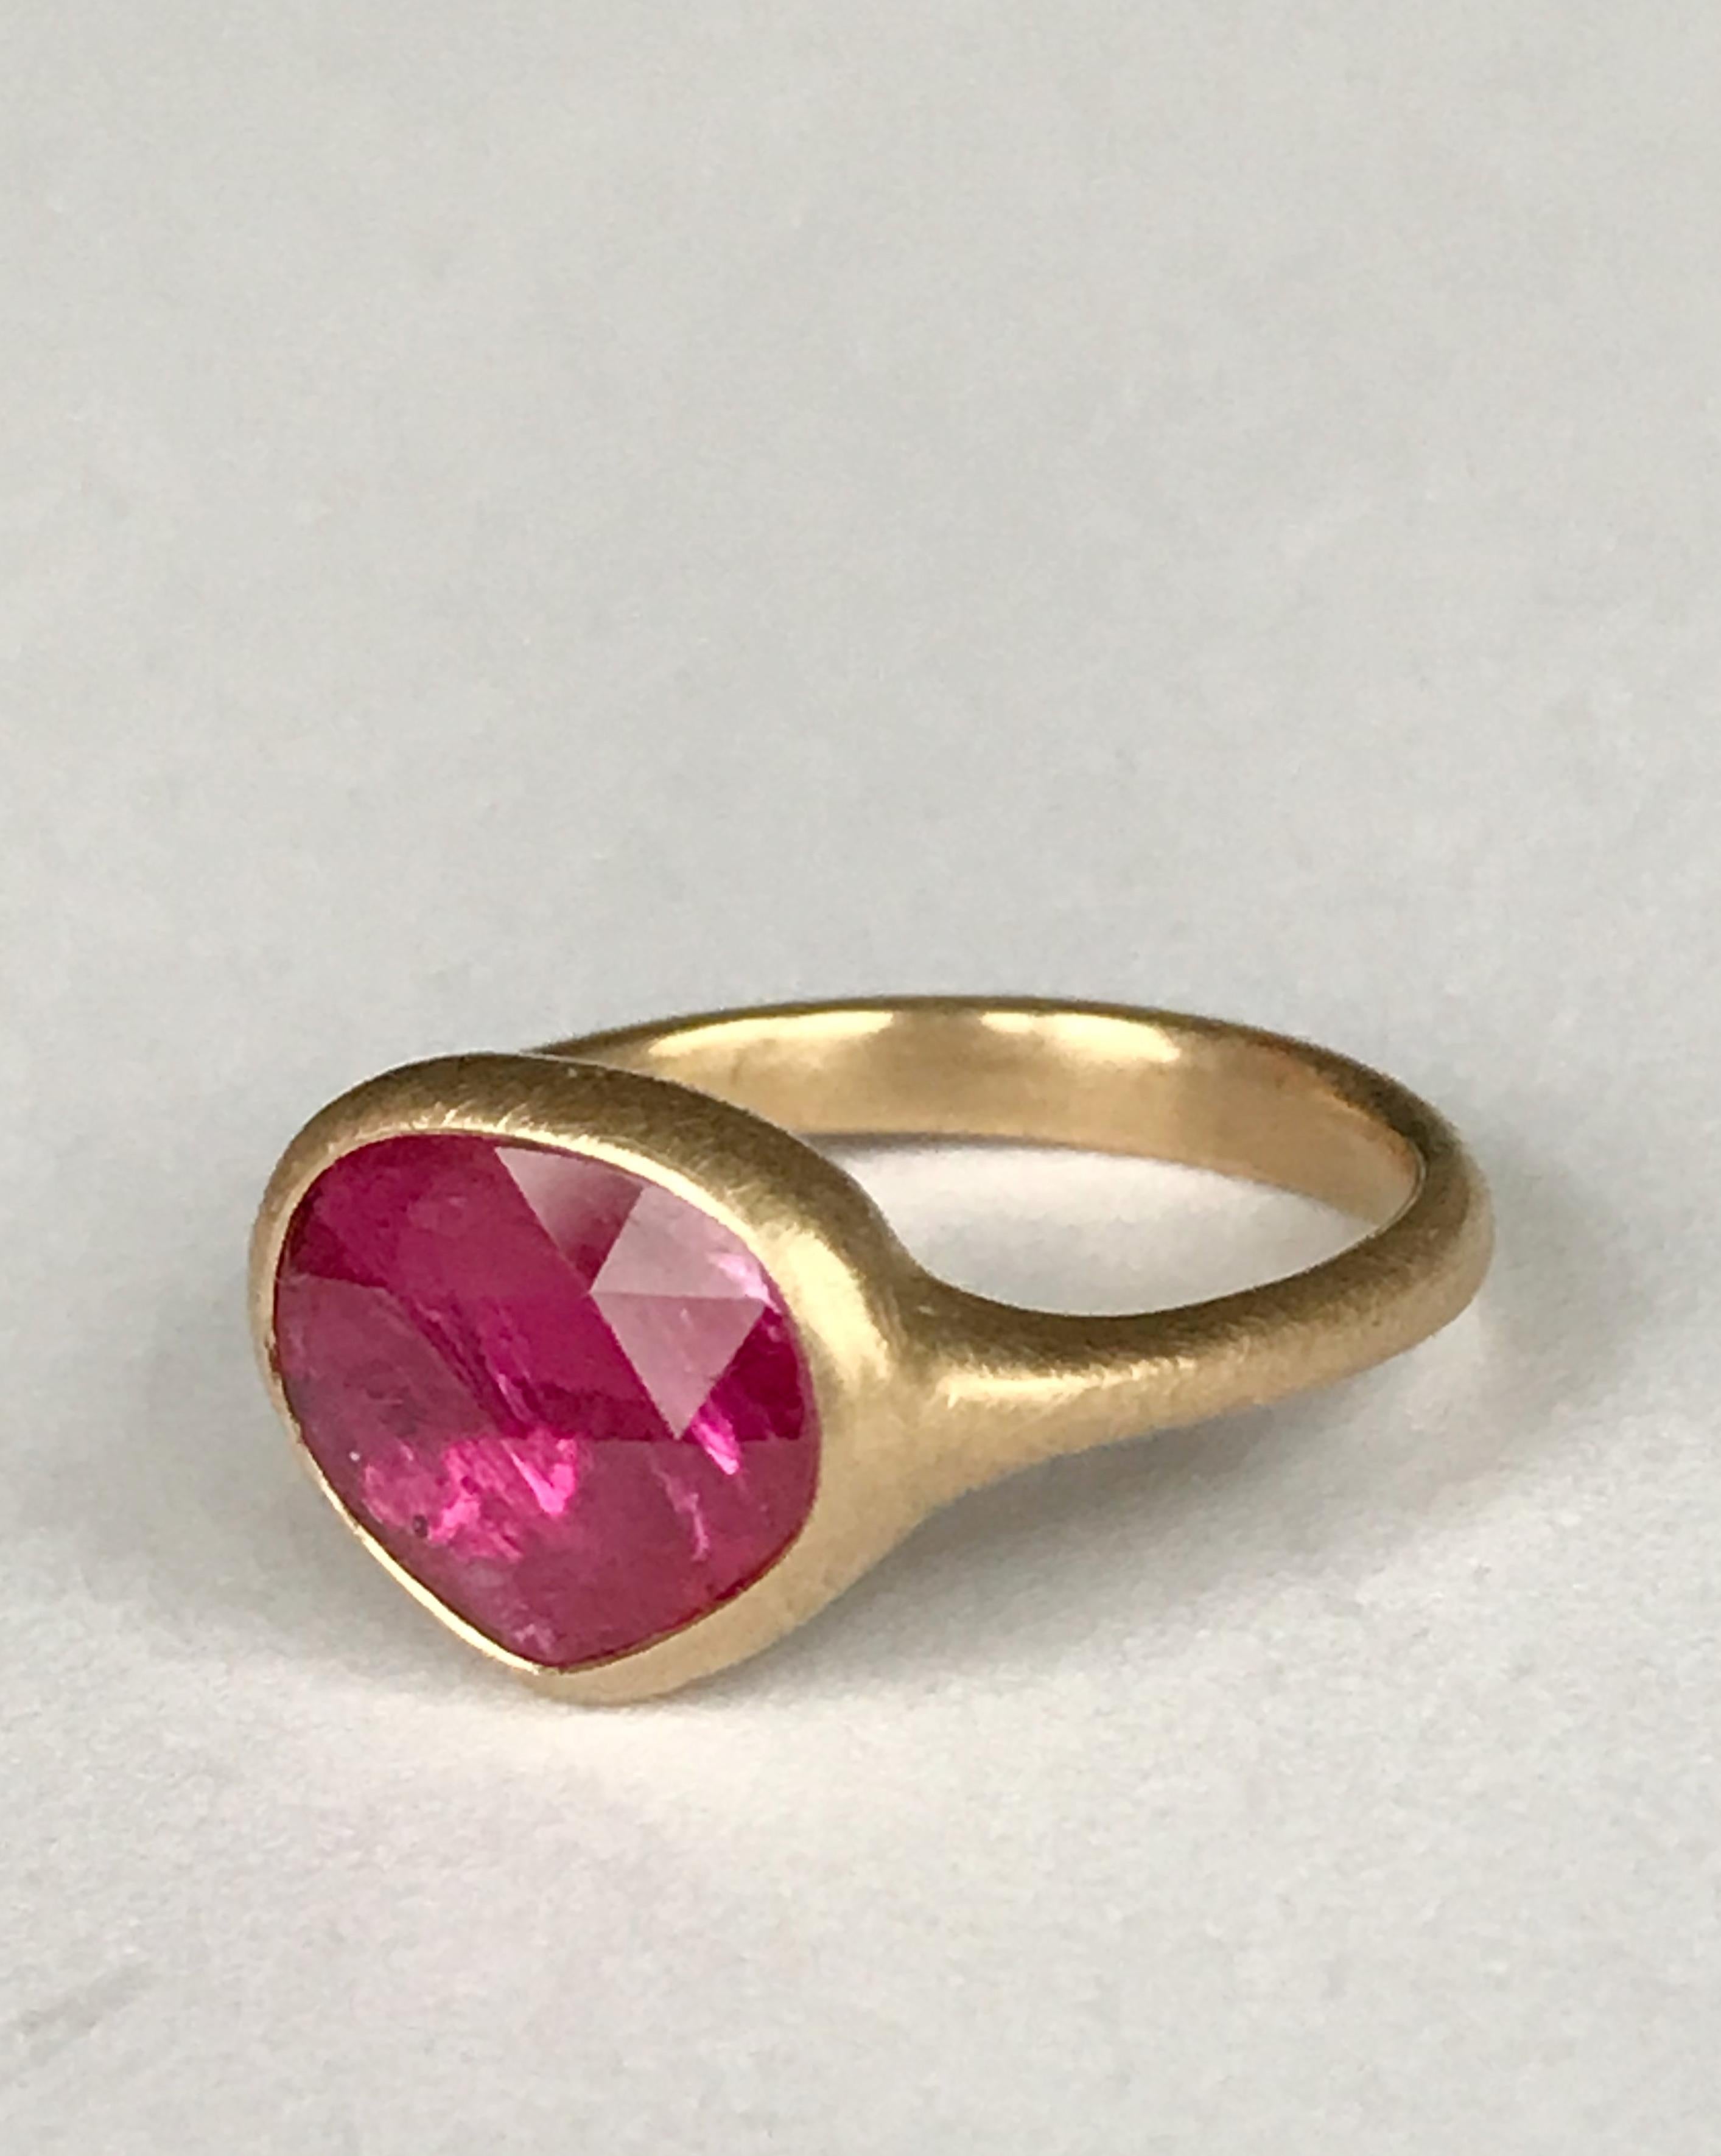 Dalben design One of a Kind 18k yellow gold matte finishing ring with a 1,69 carat bezel-set drop shape rose cut slice ruby. 
The ruby shape remind  a stylized heart.
Ring size 6 3/4 USA - EU 54 re-sizable to most finger sizes. 
Bezel stone